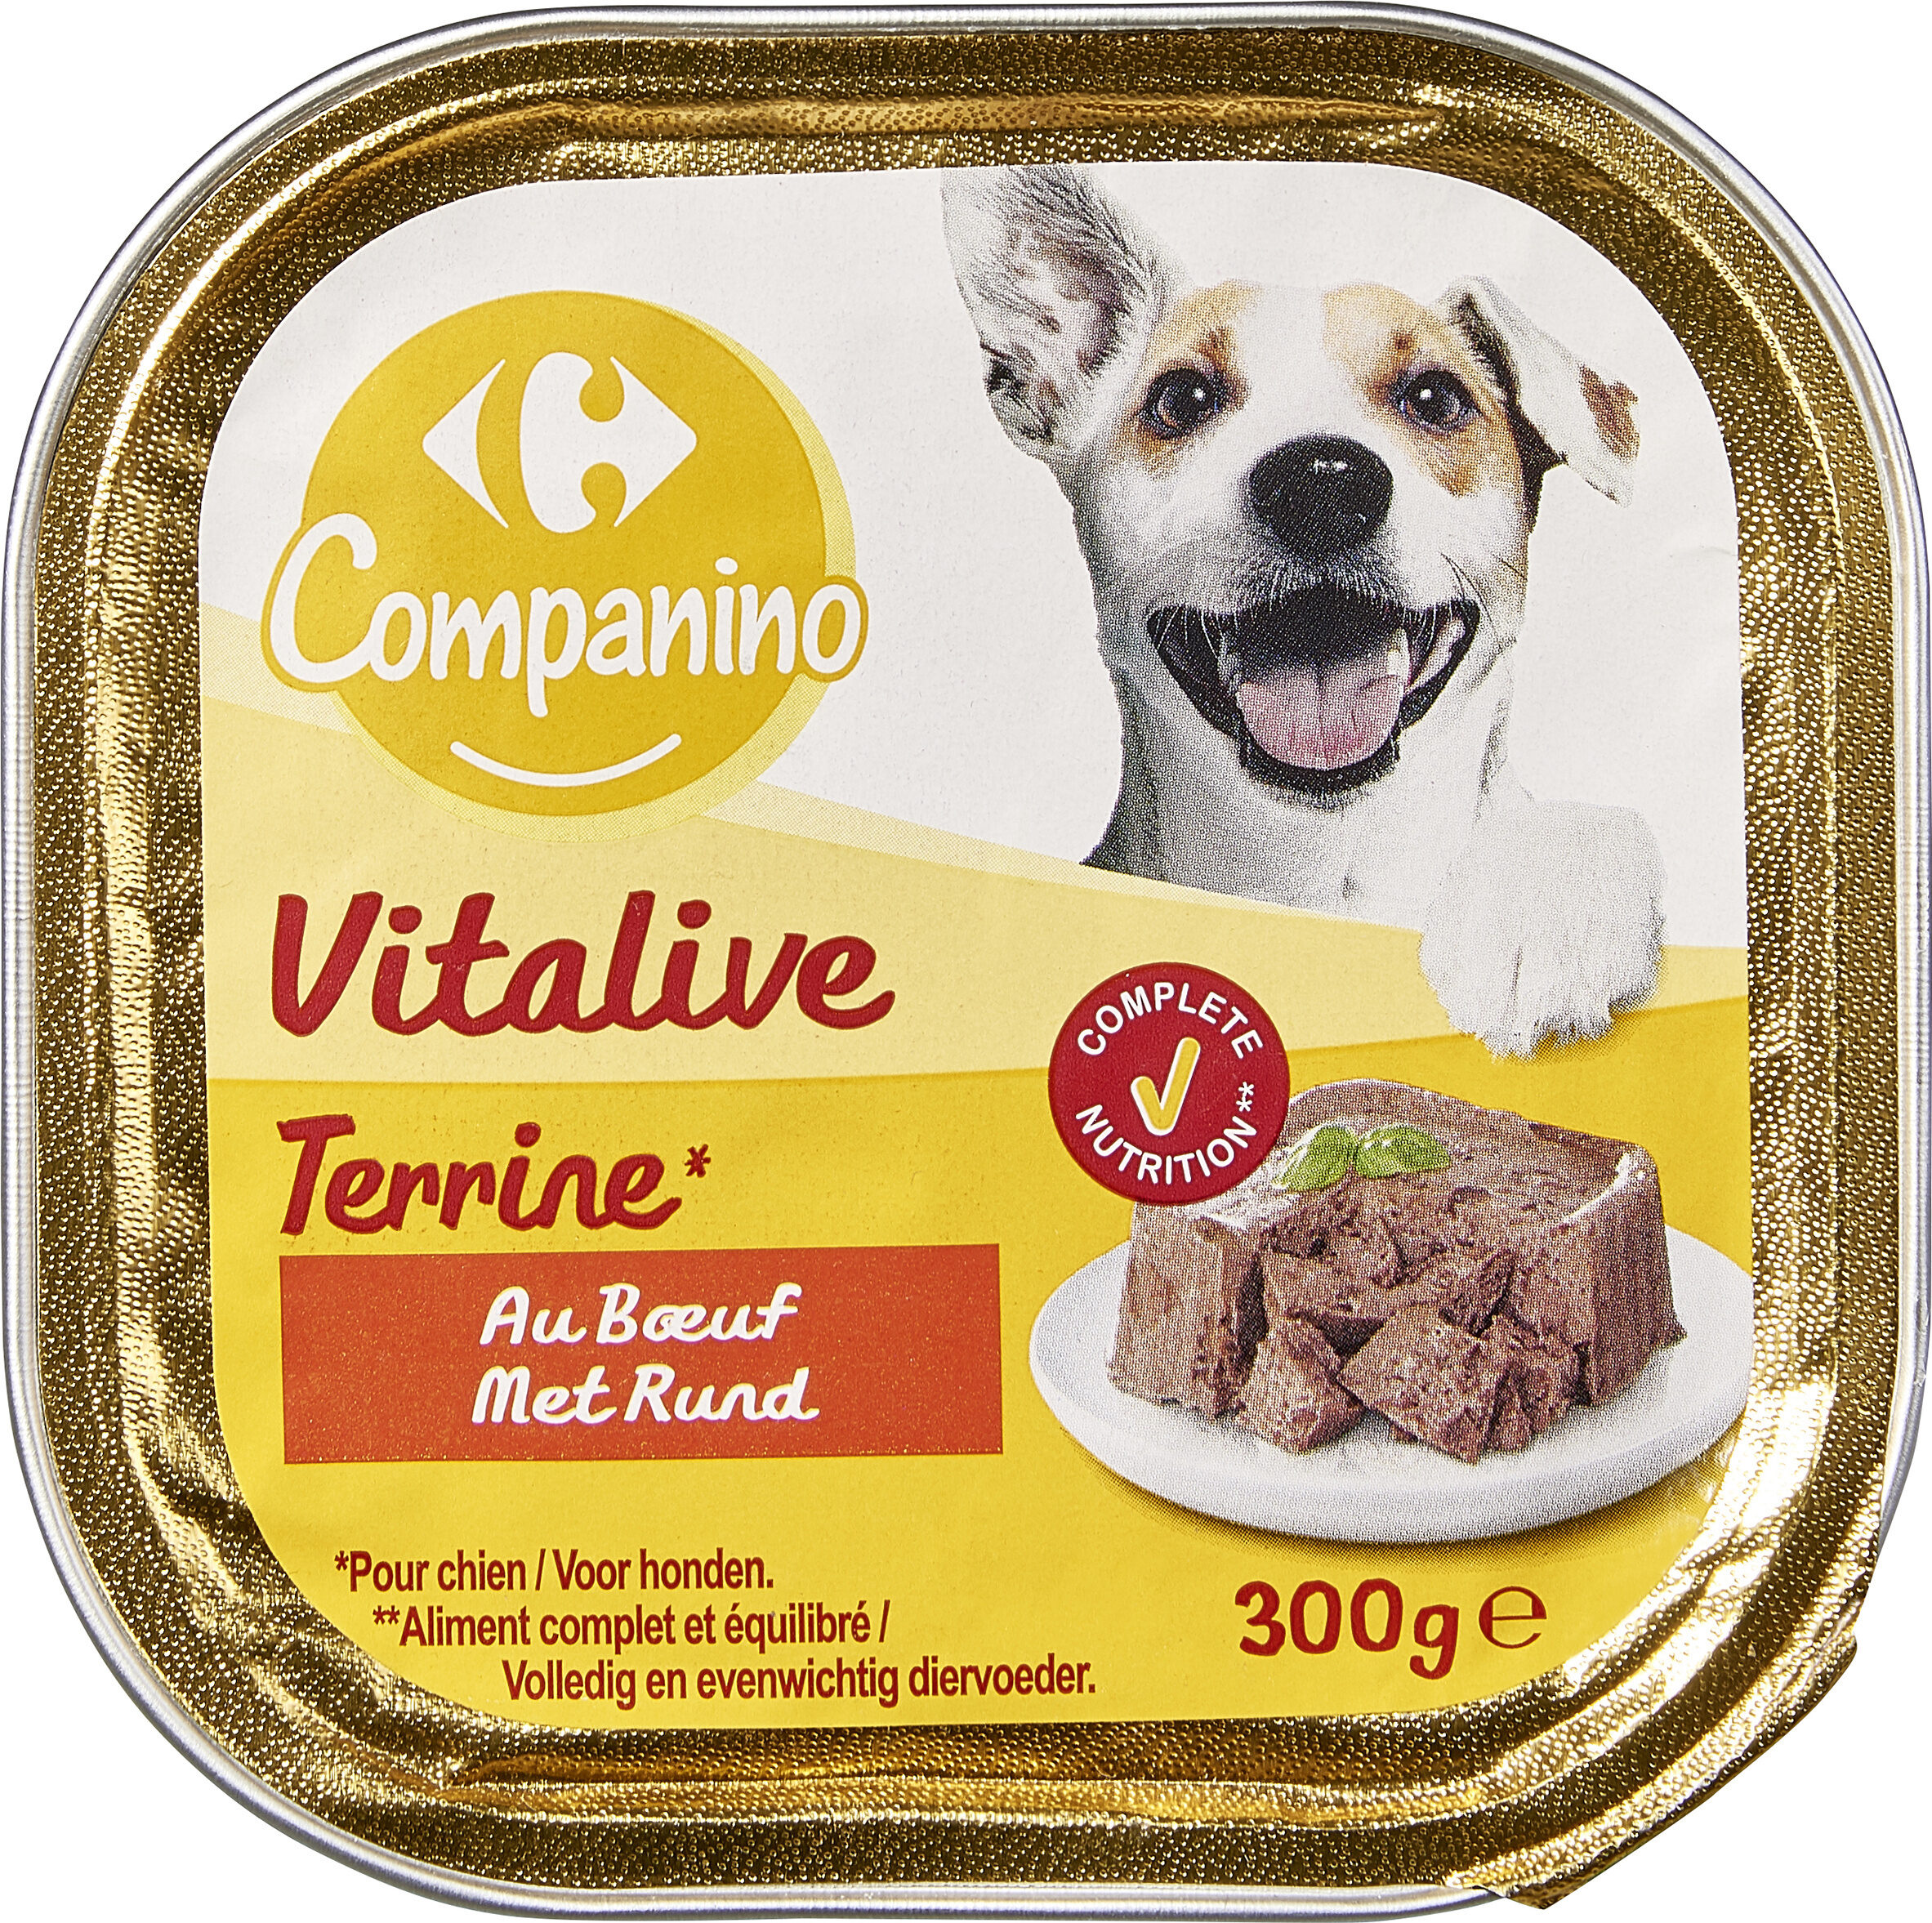 Terrine chien crf - Product - fr